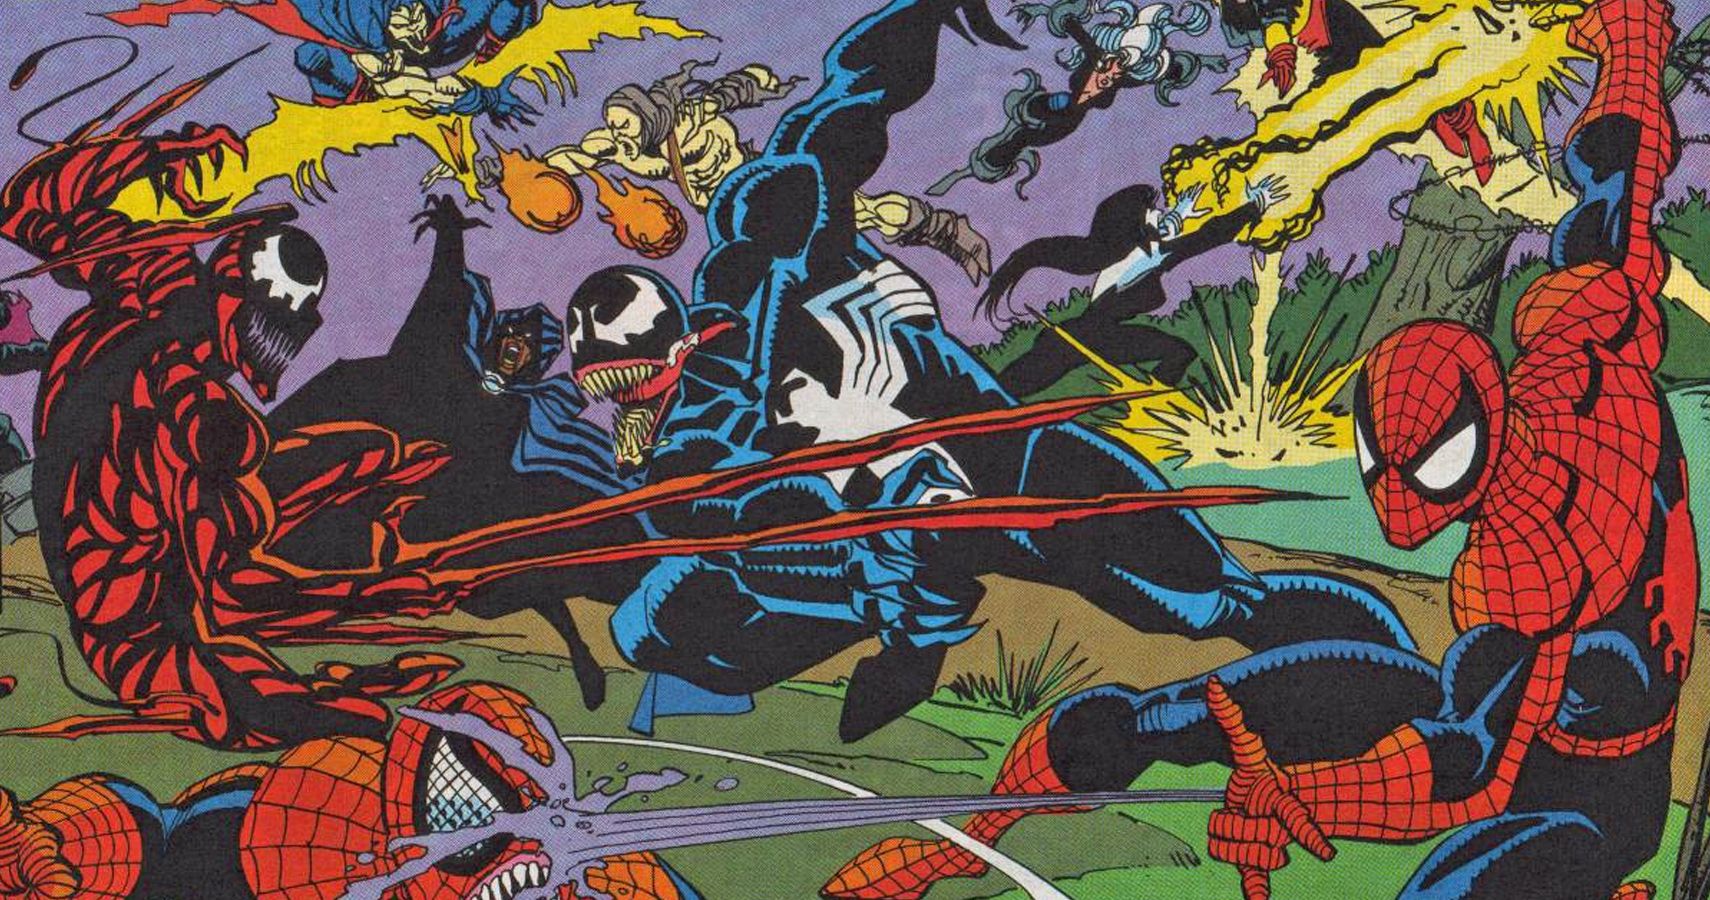 Spider-Man: The 10 Most Shocking Moments From The Maximum Carnage Storyline